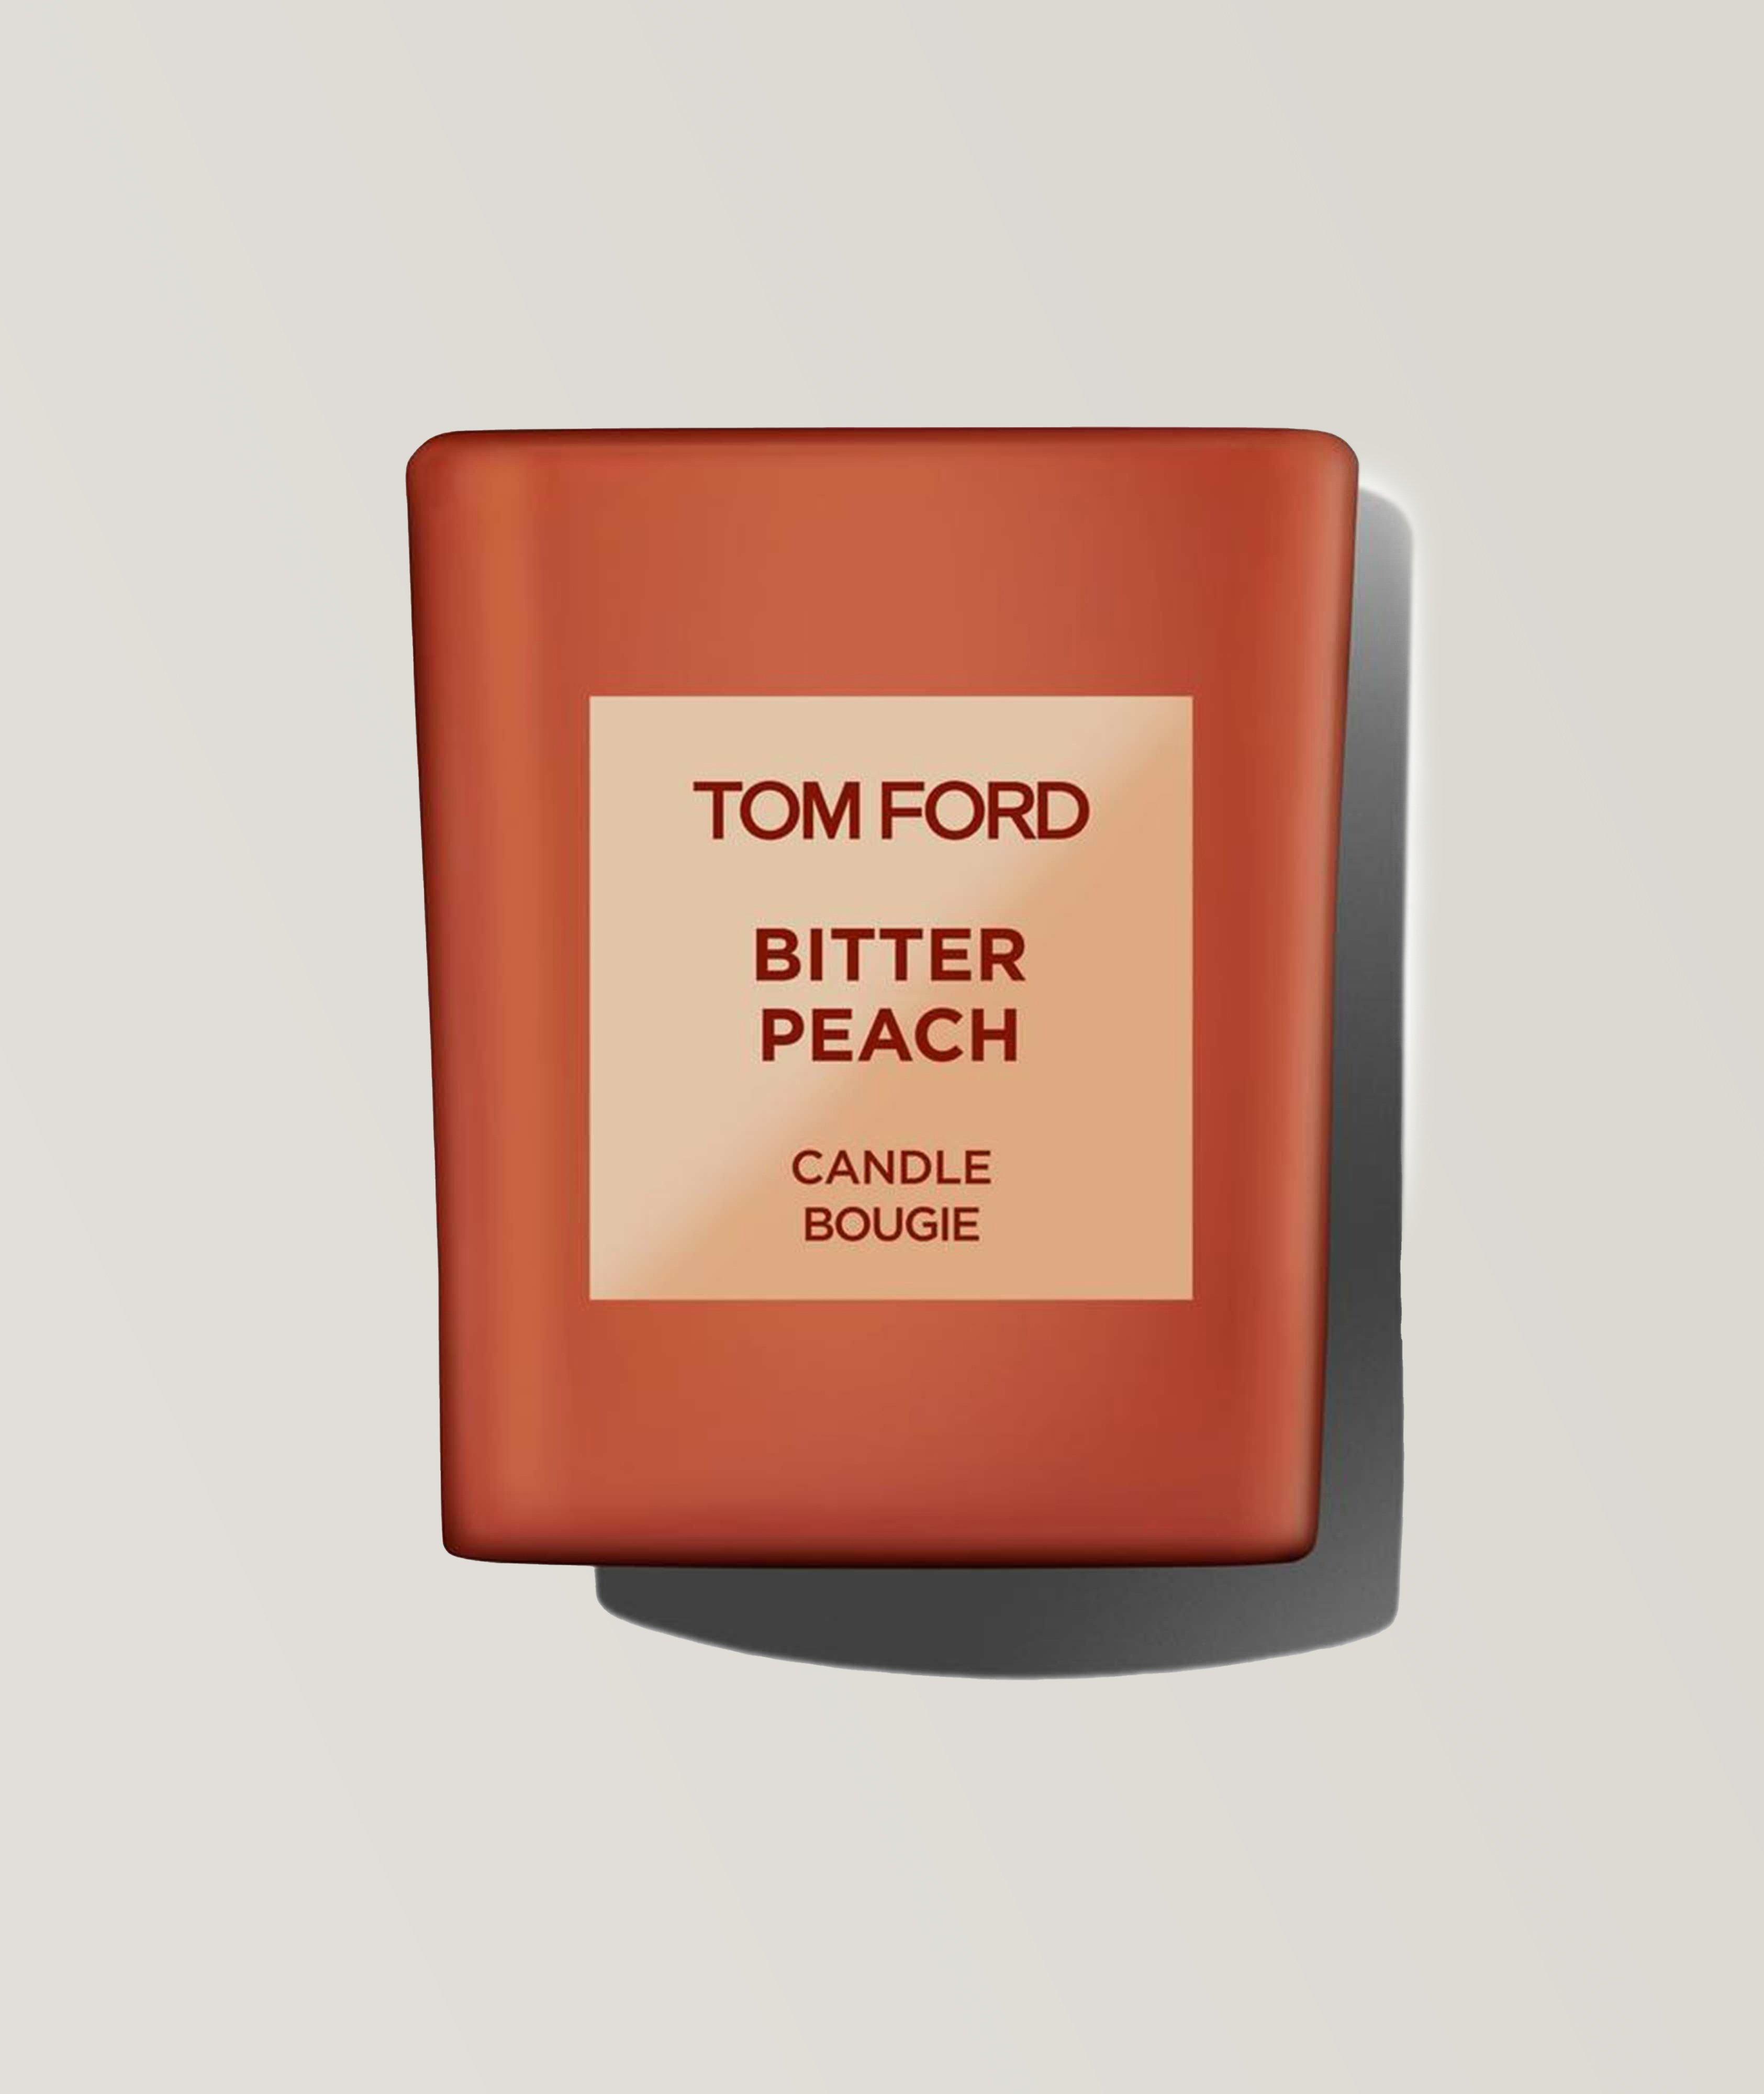 TOM FORD Bitter Peach Candle 